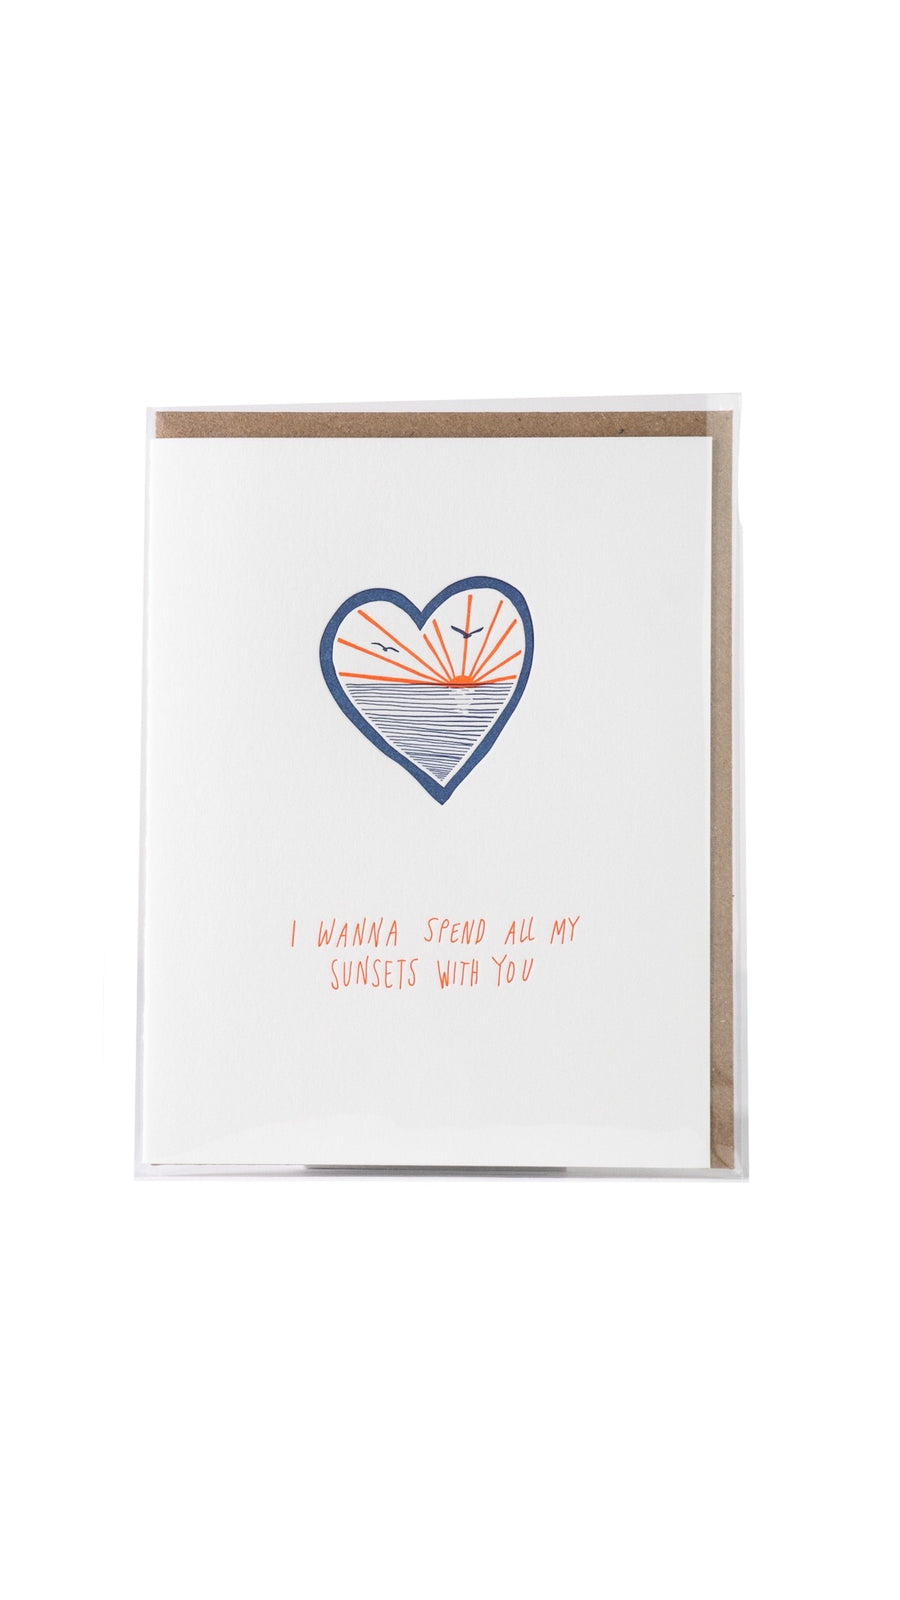 I Wanna Spend All My Sunsets w/You Card by Lark Press